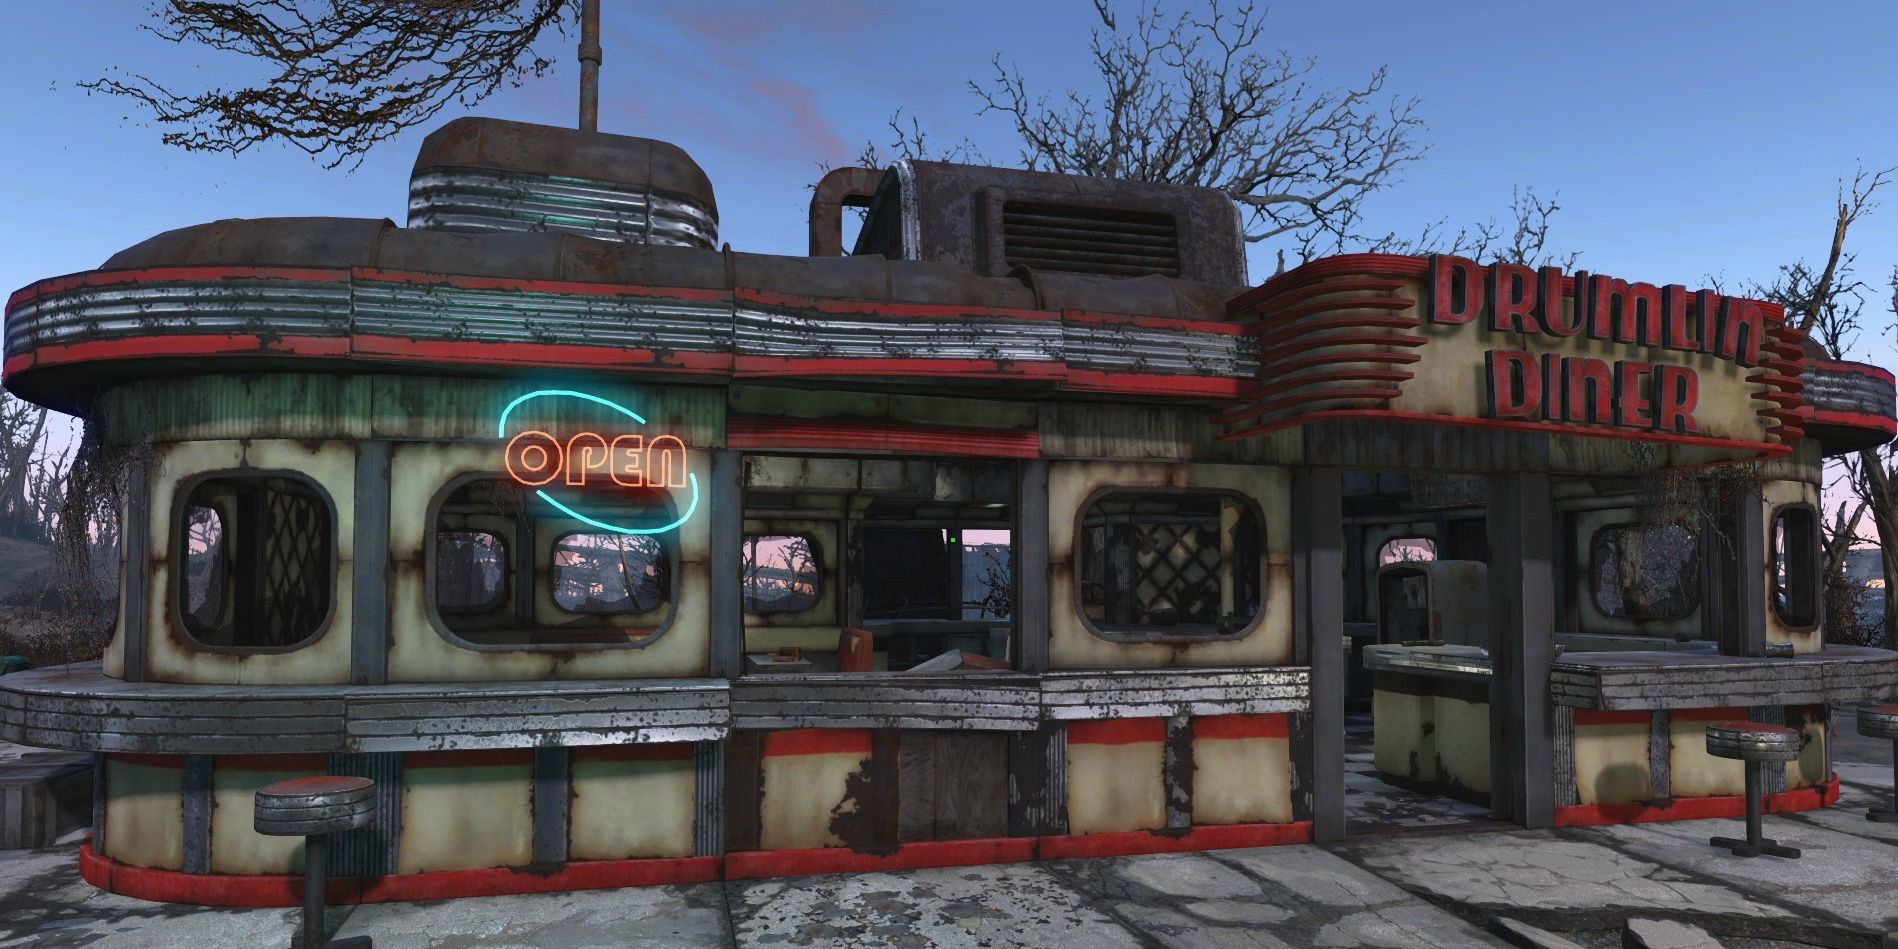 Drumlin Diner in Fallout 4